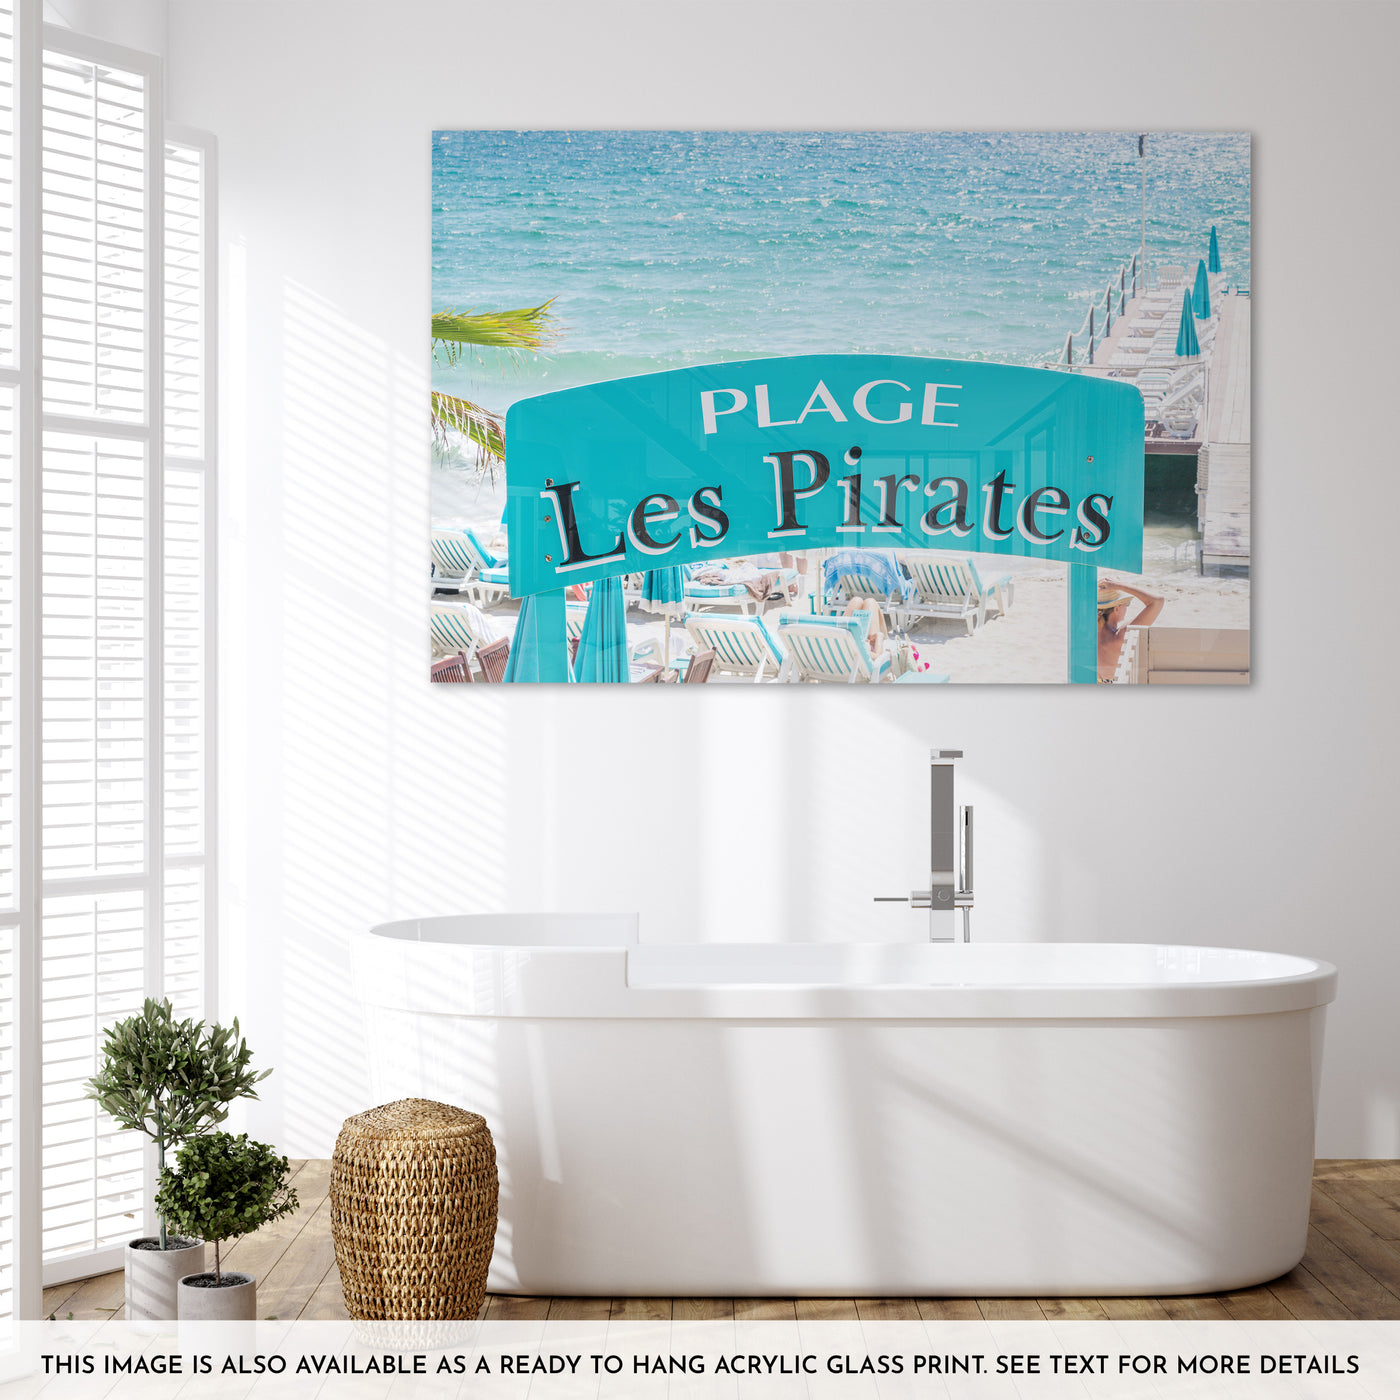 Plage les Pirates - Beach photography acrylic glass print by Cattie Coyle Photography in bathroom